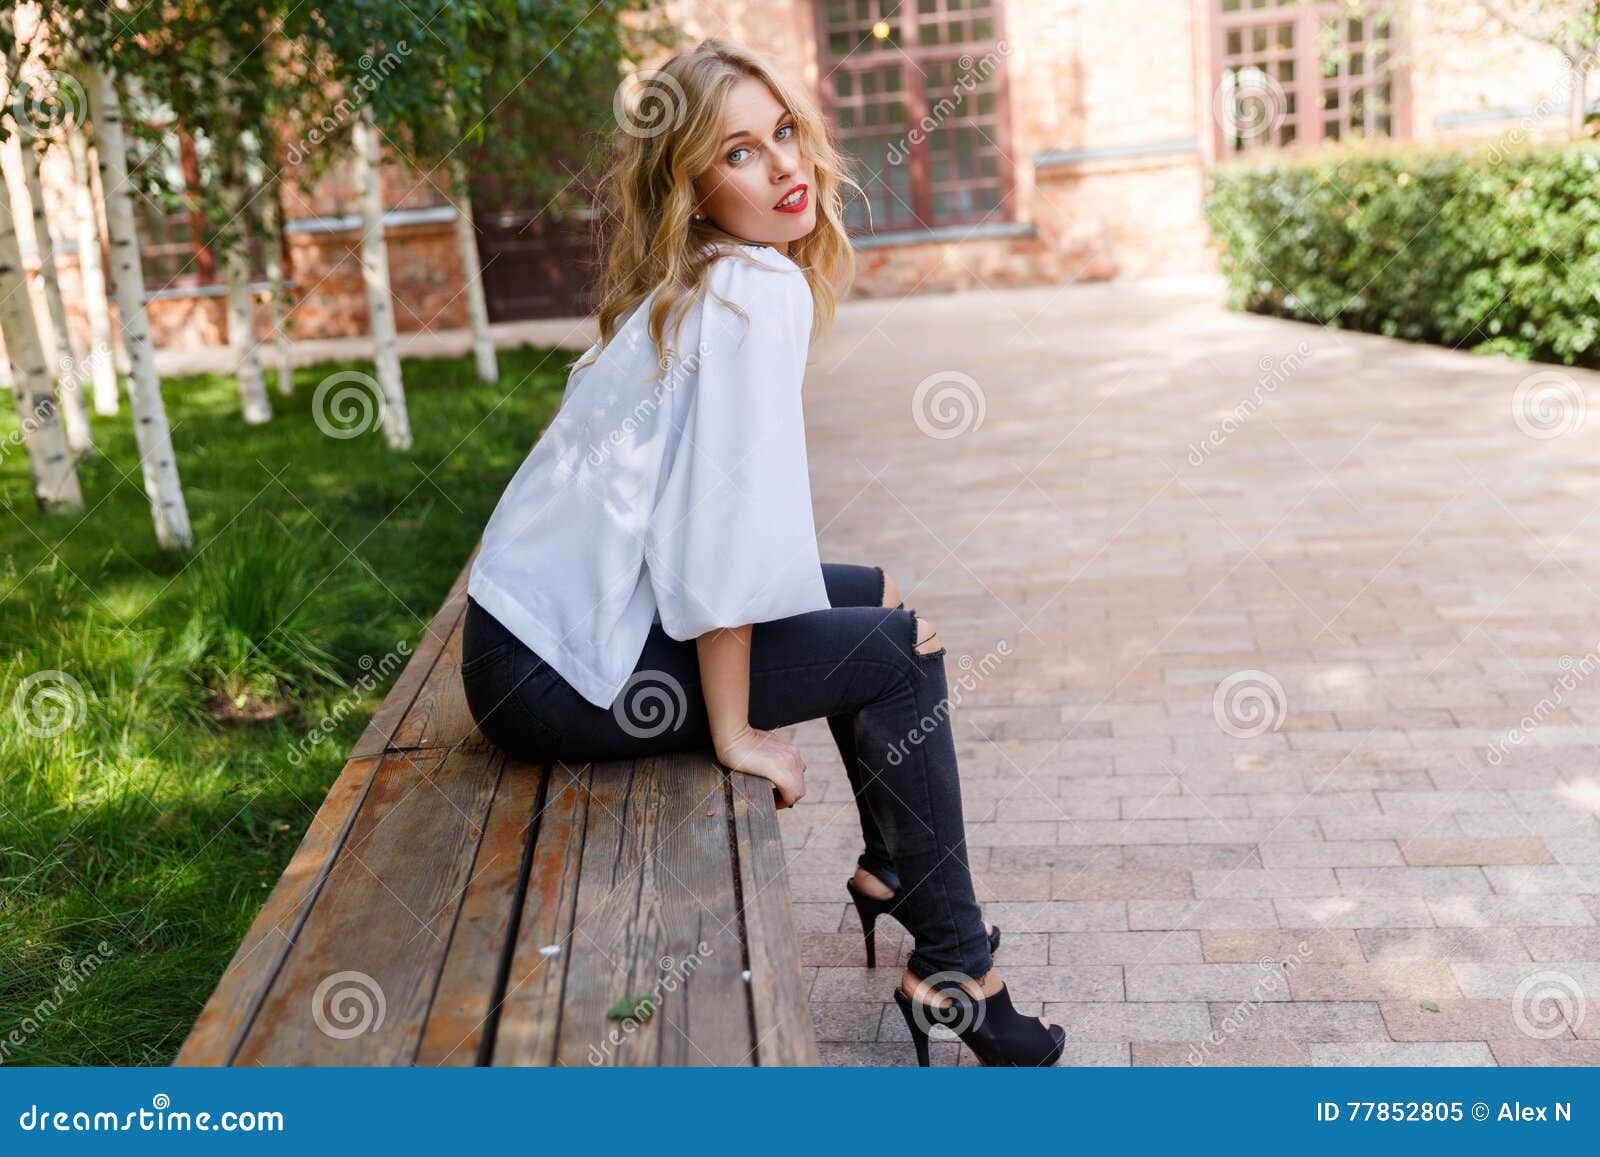 Blonde Woman in Ripped Jeans Sitting on Park Bench Stock Image - Image ...